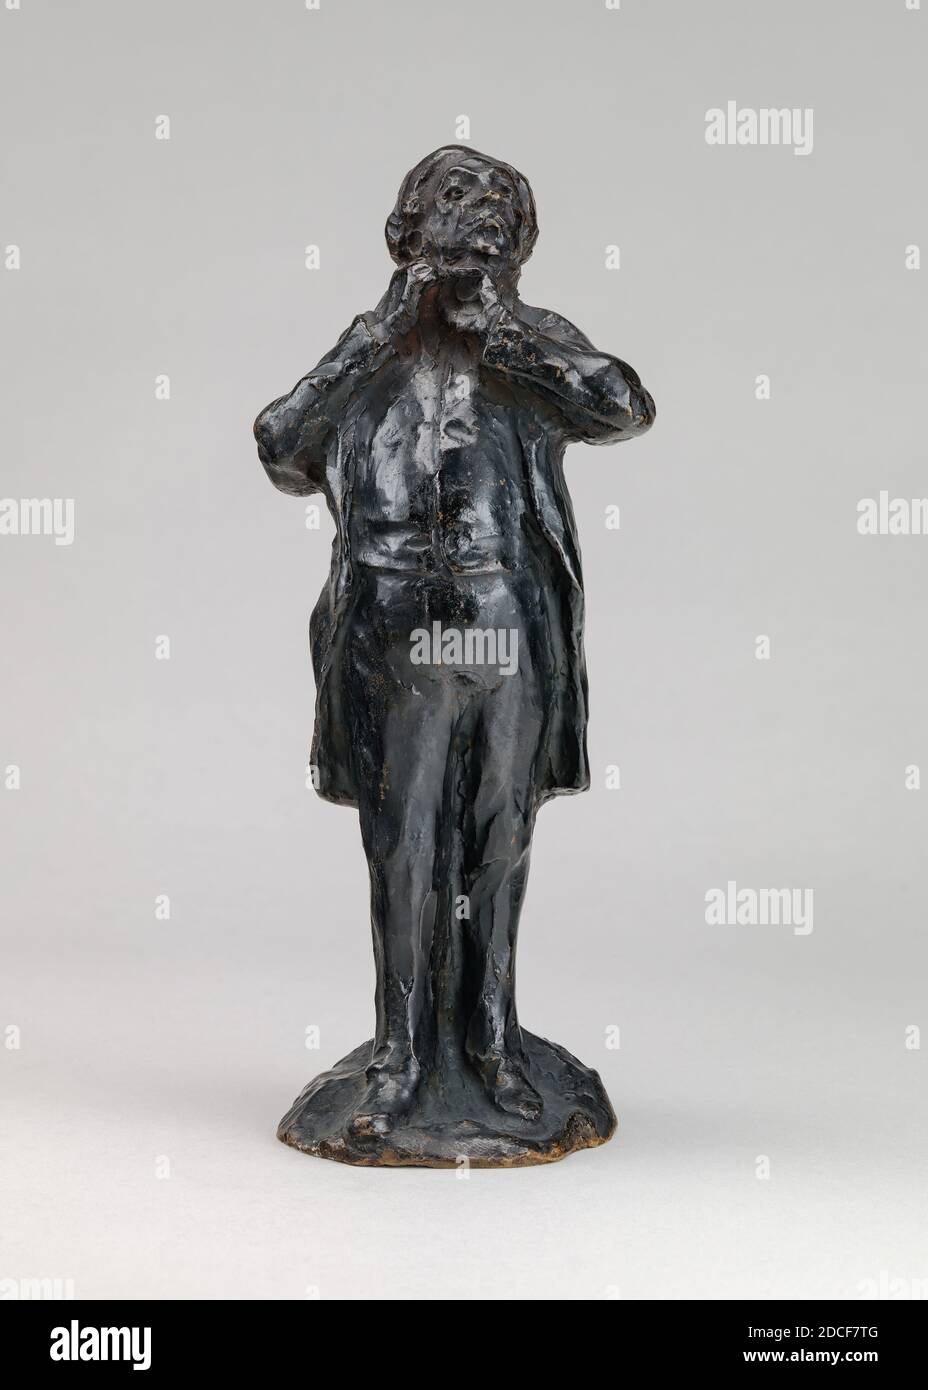 Anonymous Artist, (sculptor), Honoré Daumier, (related artist), French, 1808 - 1879, The Representative (Le représentant noue sa cravate), model probably after 1860, cast around November 1954, bronze, overall: 17.6 x 7.2 x 6.5 cm (6 15/16 x 2 13/16 x 2 9/16 in Stock Photo